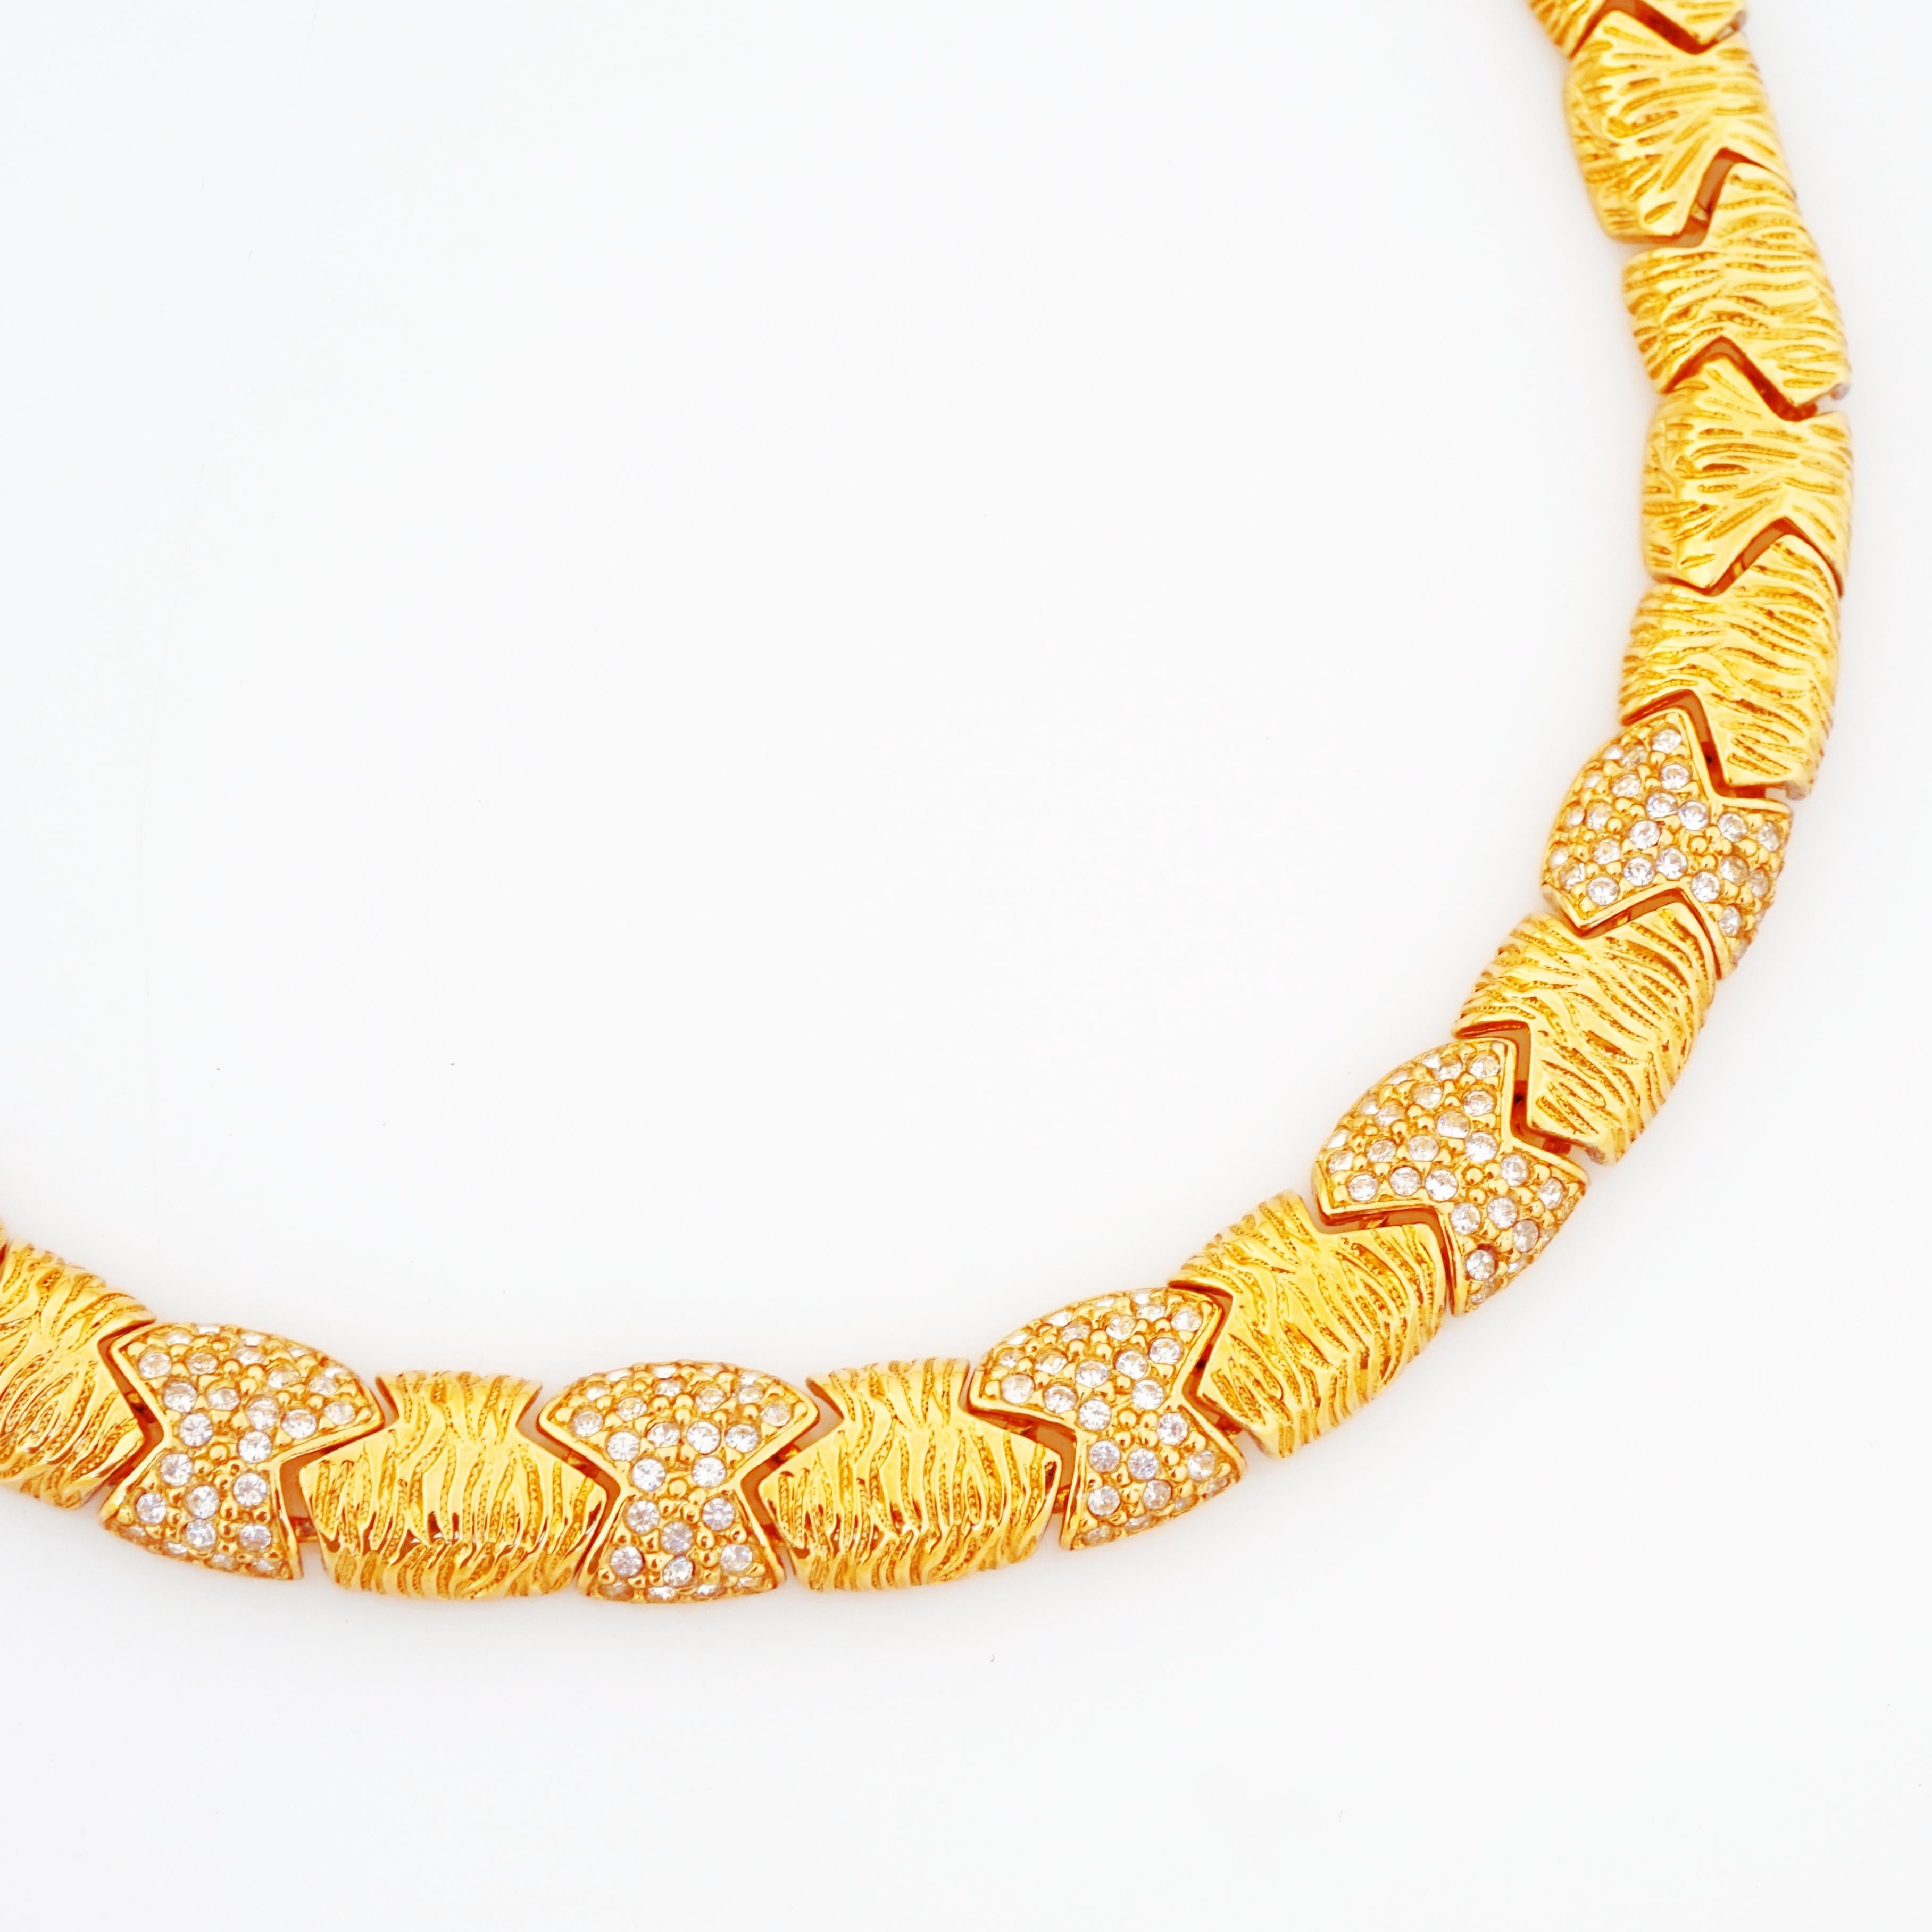 Modern Gilt Textured Link Choker Necklace With Crystal Pavé By Givenchy, 1980s